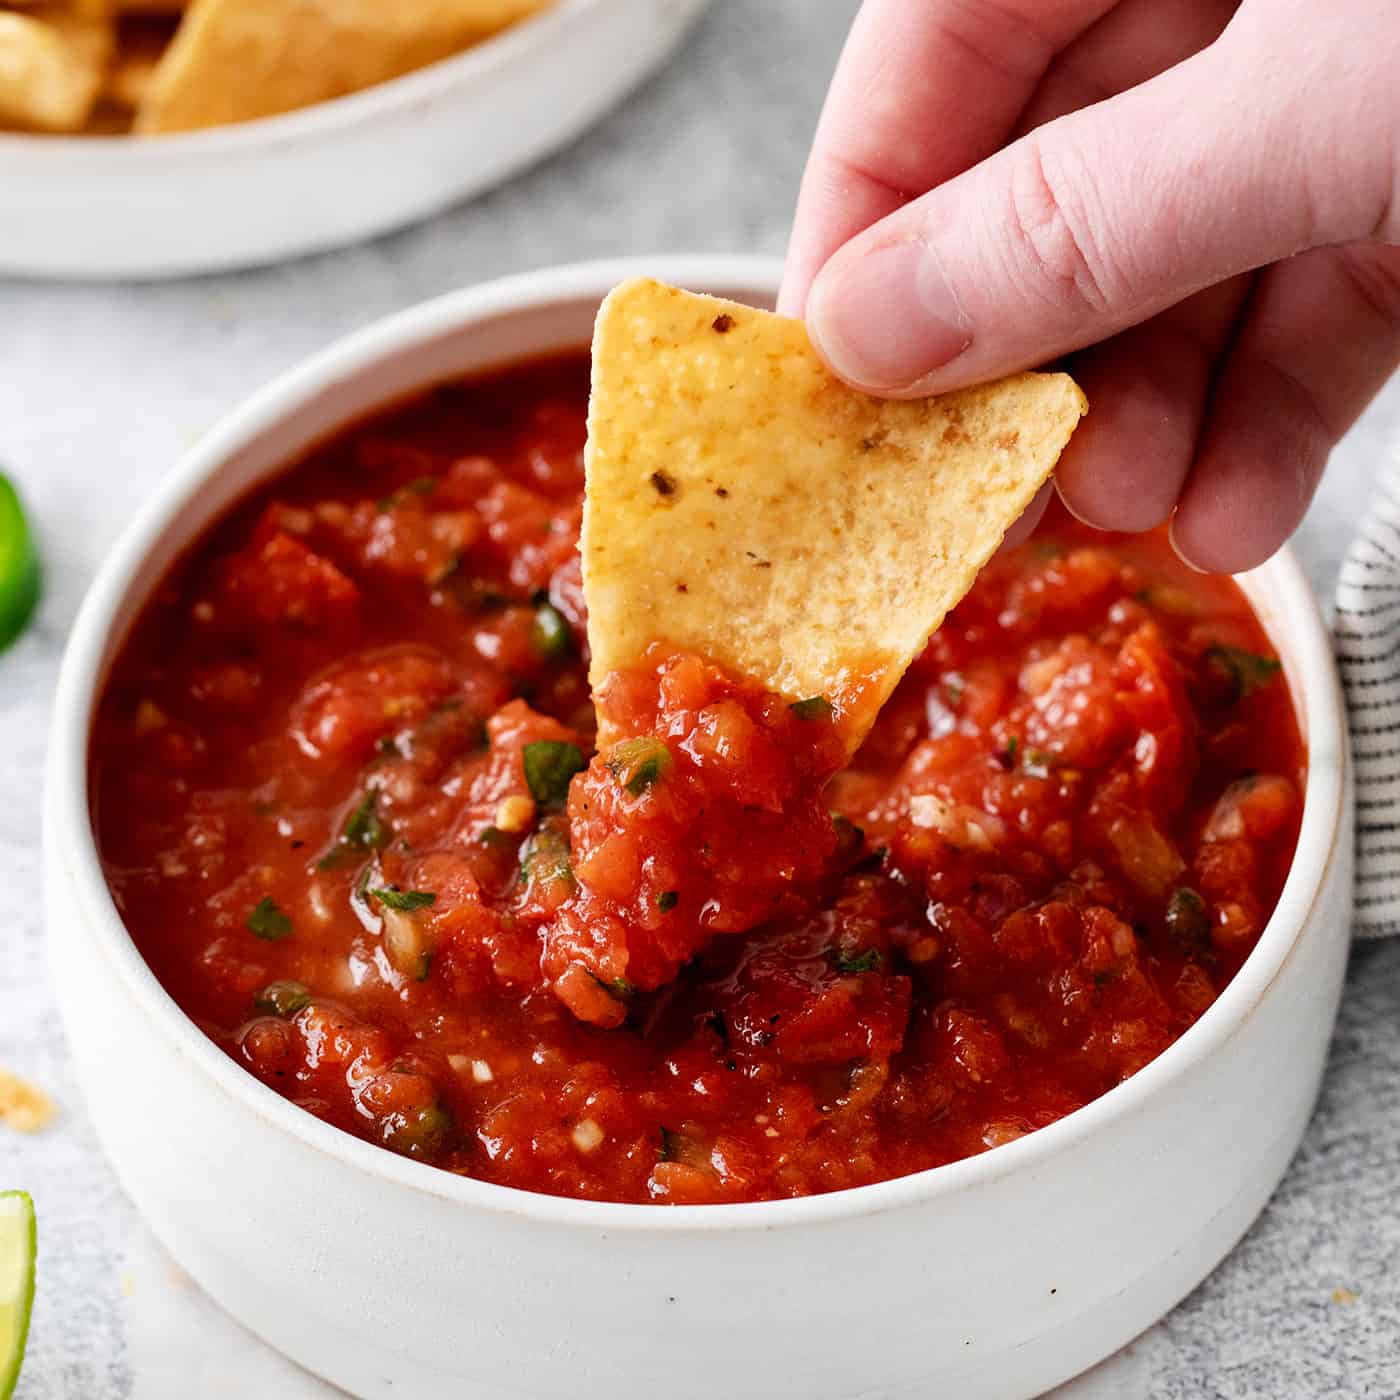 A hand dipping a chip into salsa